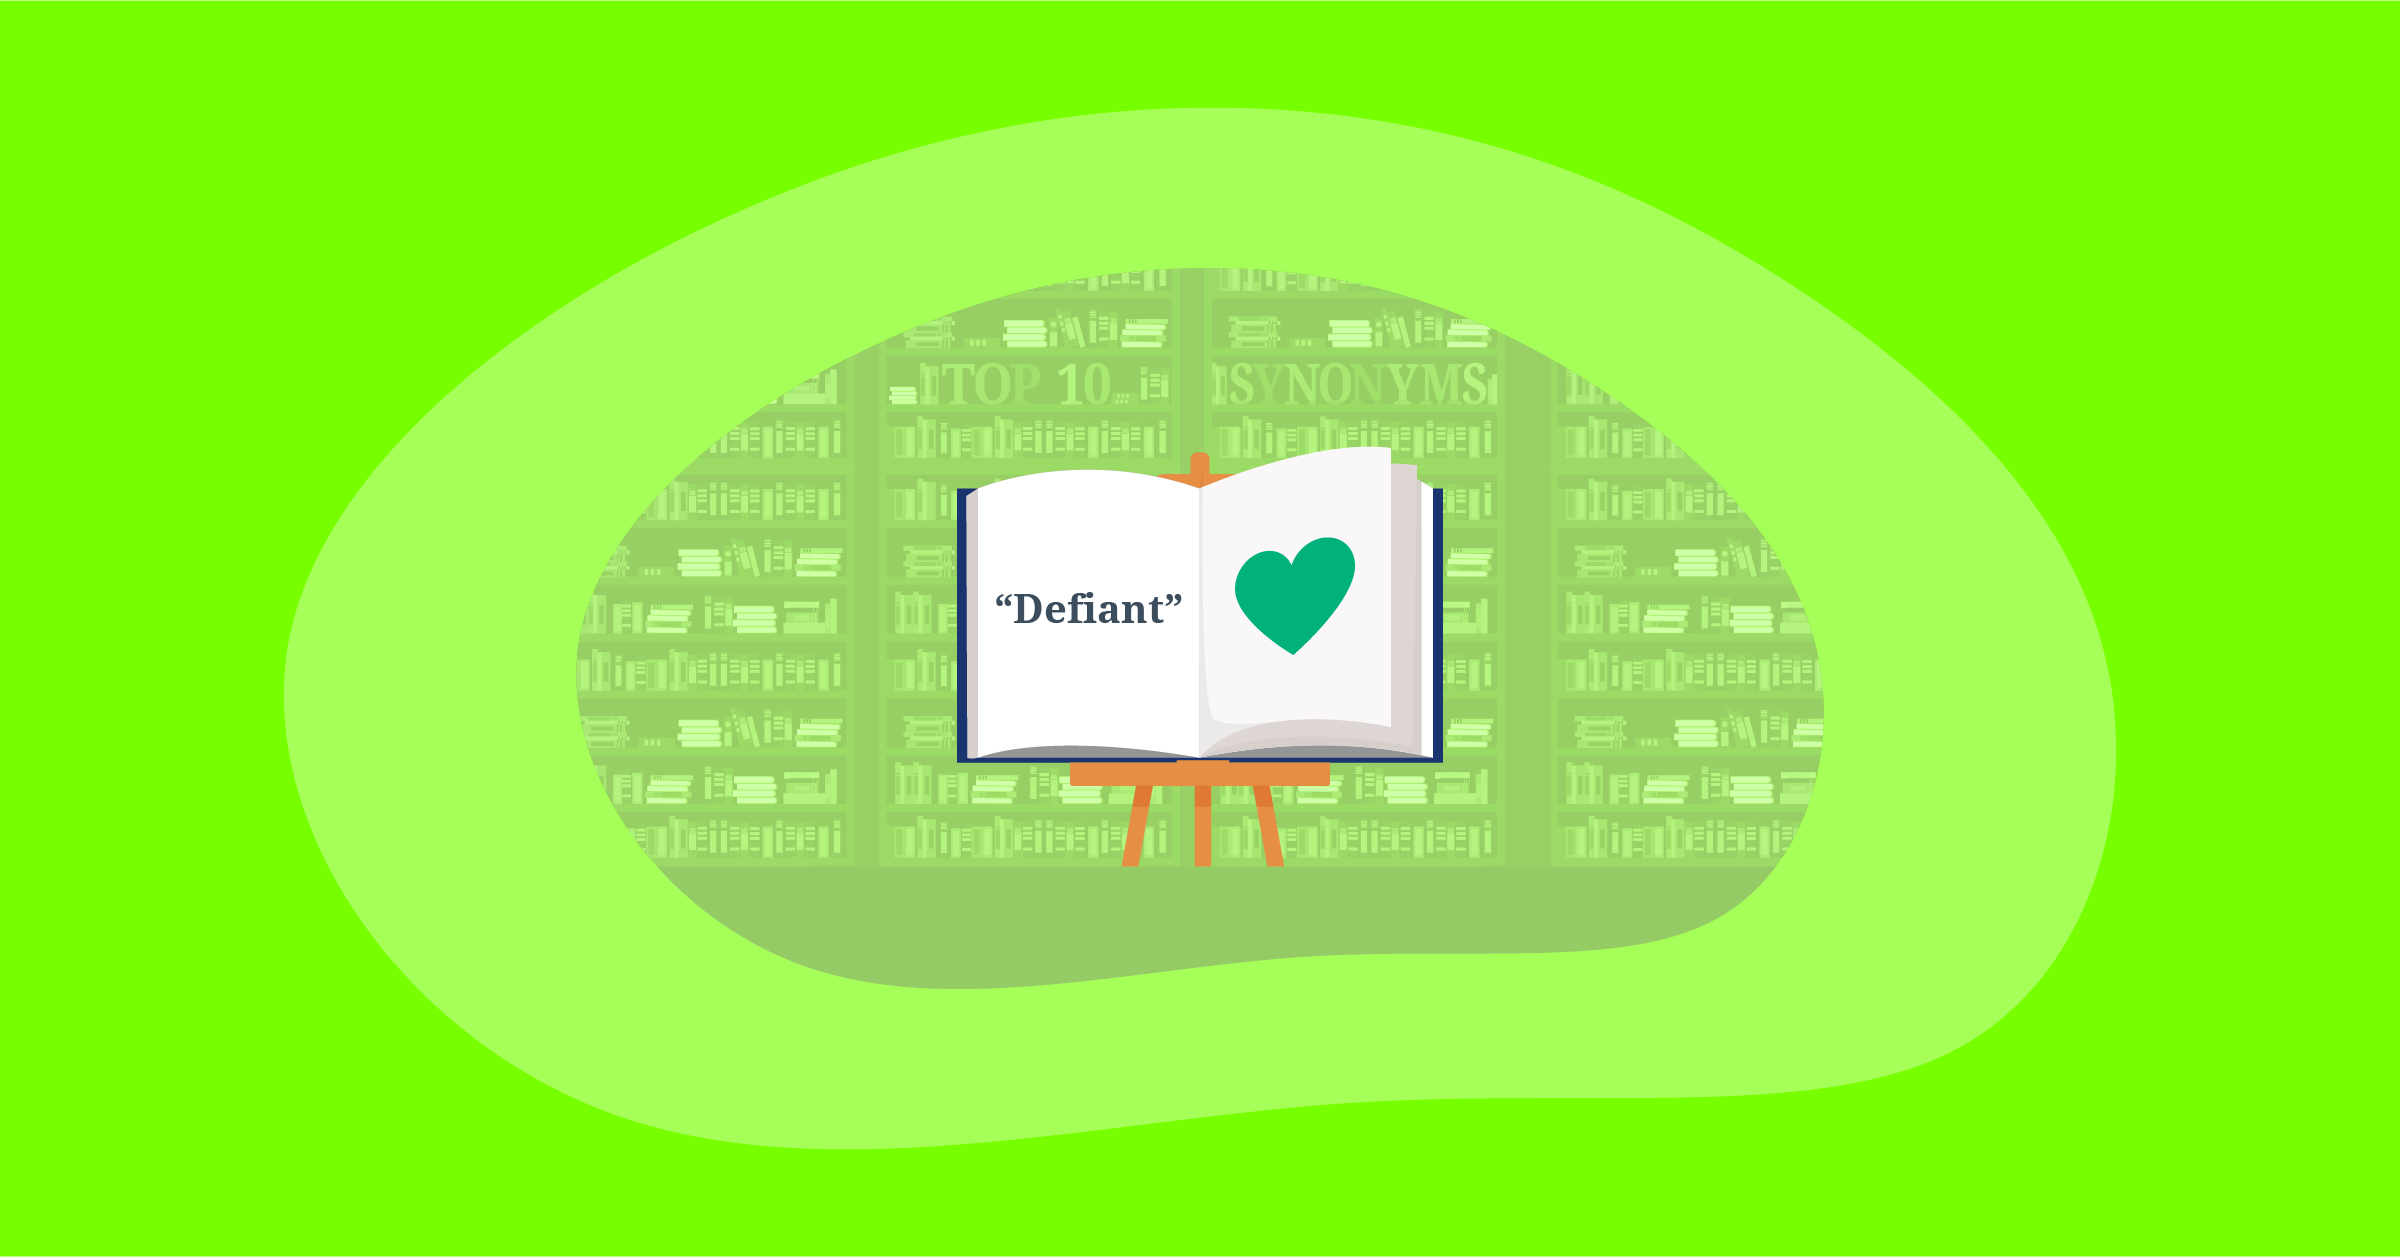 Illustration for Top 10 Positive & Impactful Synonyms for “Defiant”